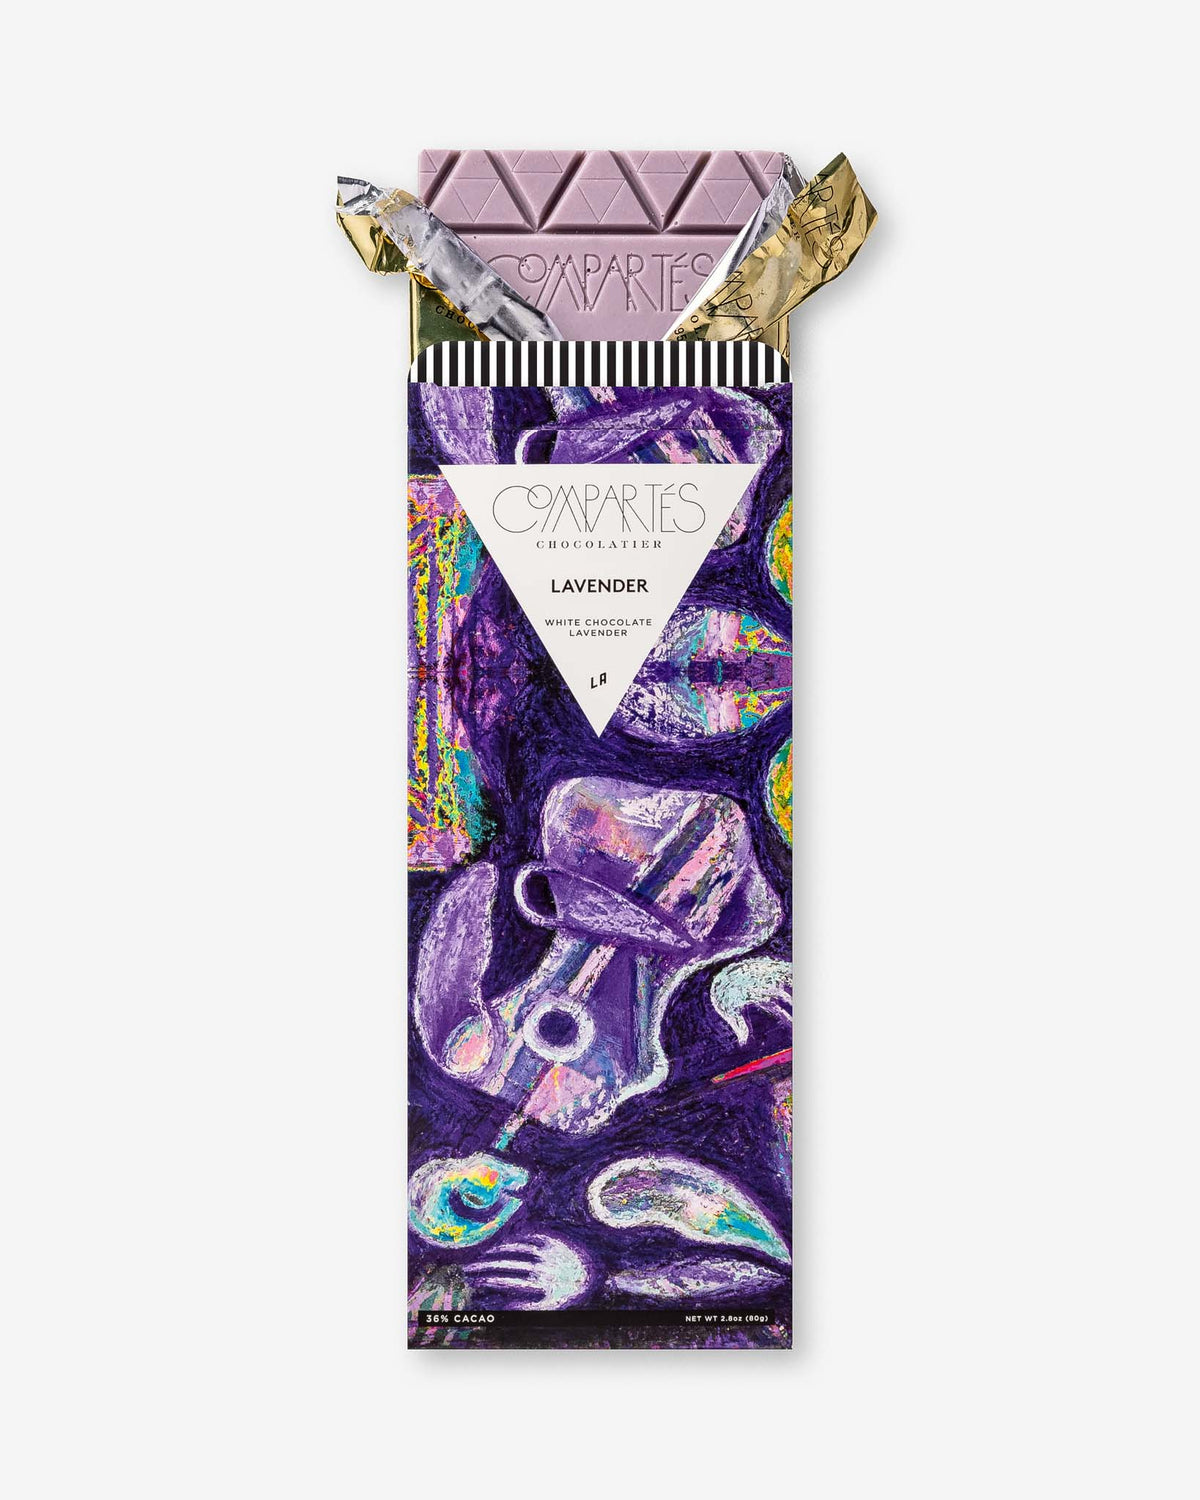 Gourmet Chocolate Bars - Lavender Luxury Chocolate Bar for Gifting